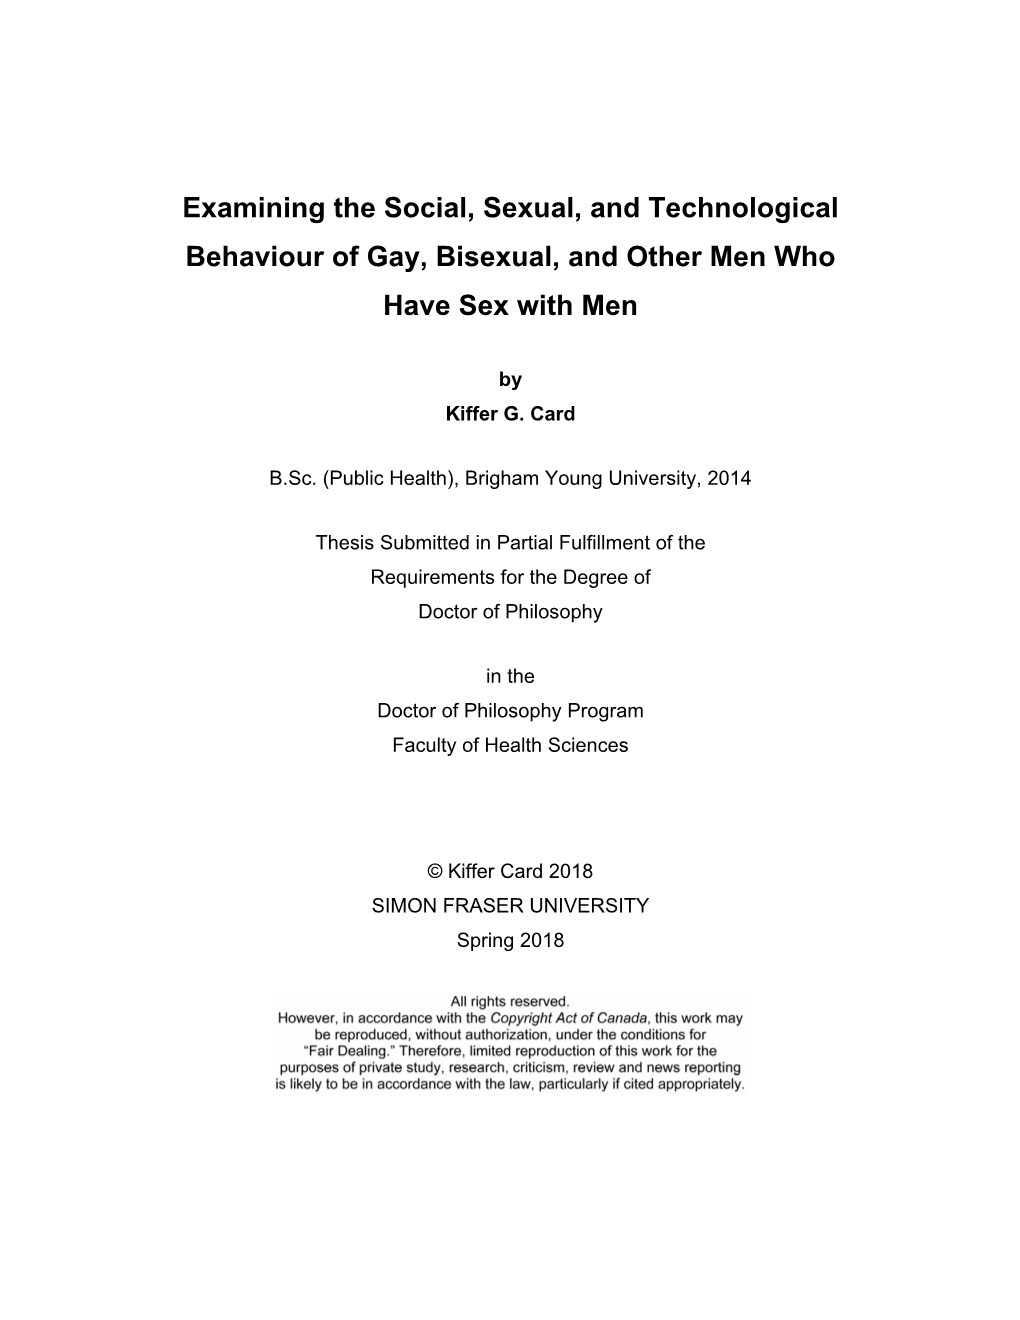 Examining the Social, Sexual, and Technological Behaviour of Gay, Bisexual, and Other Men Who Have Sex with Men